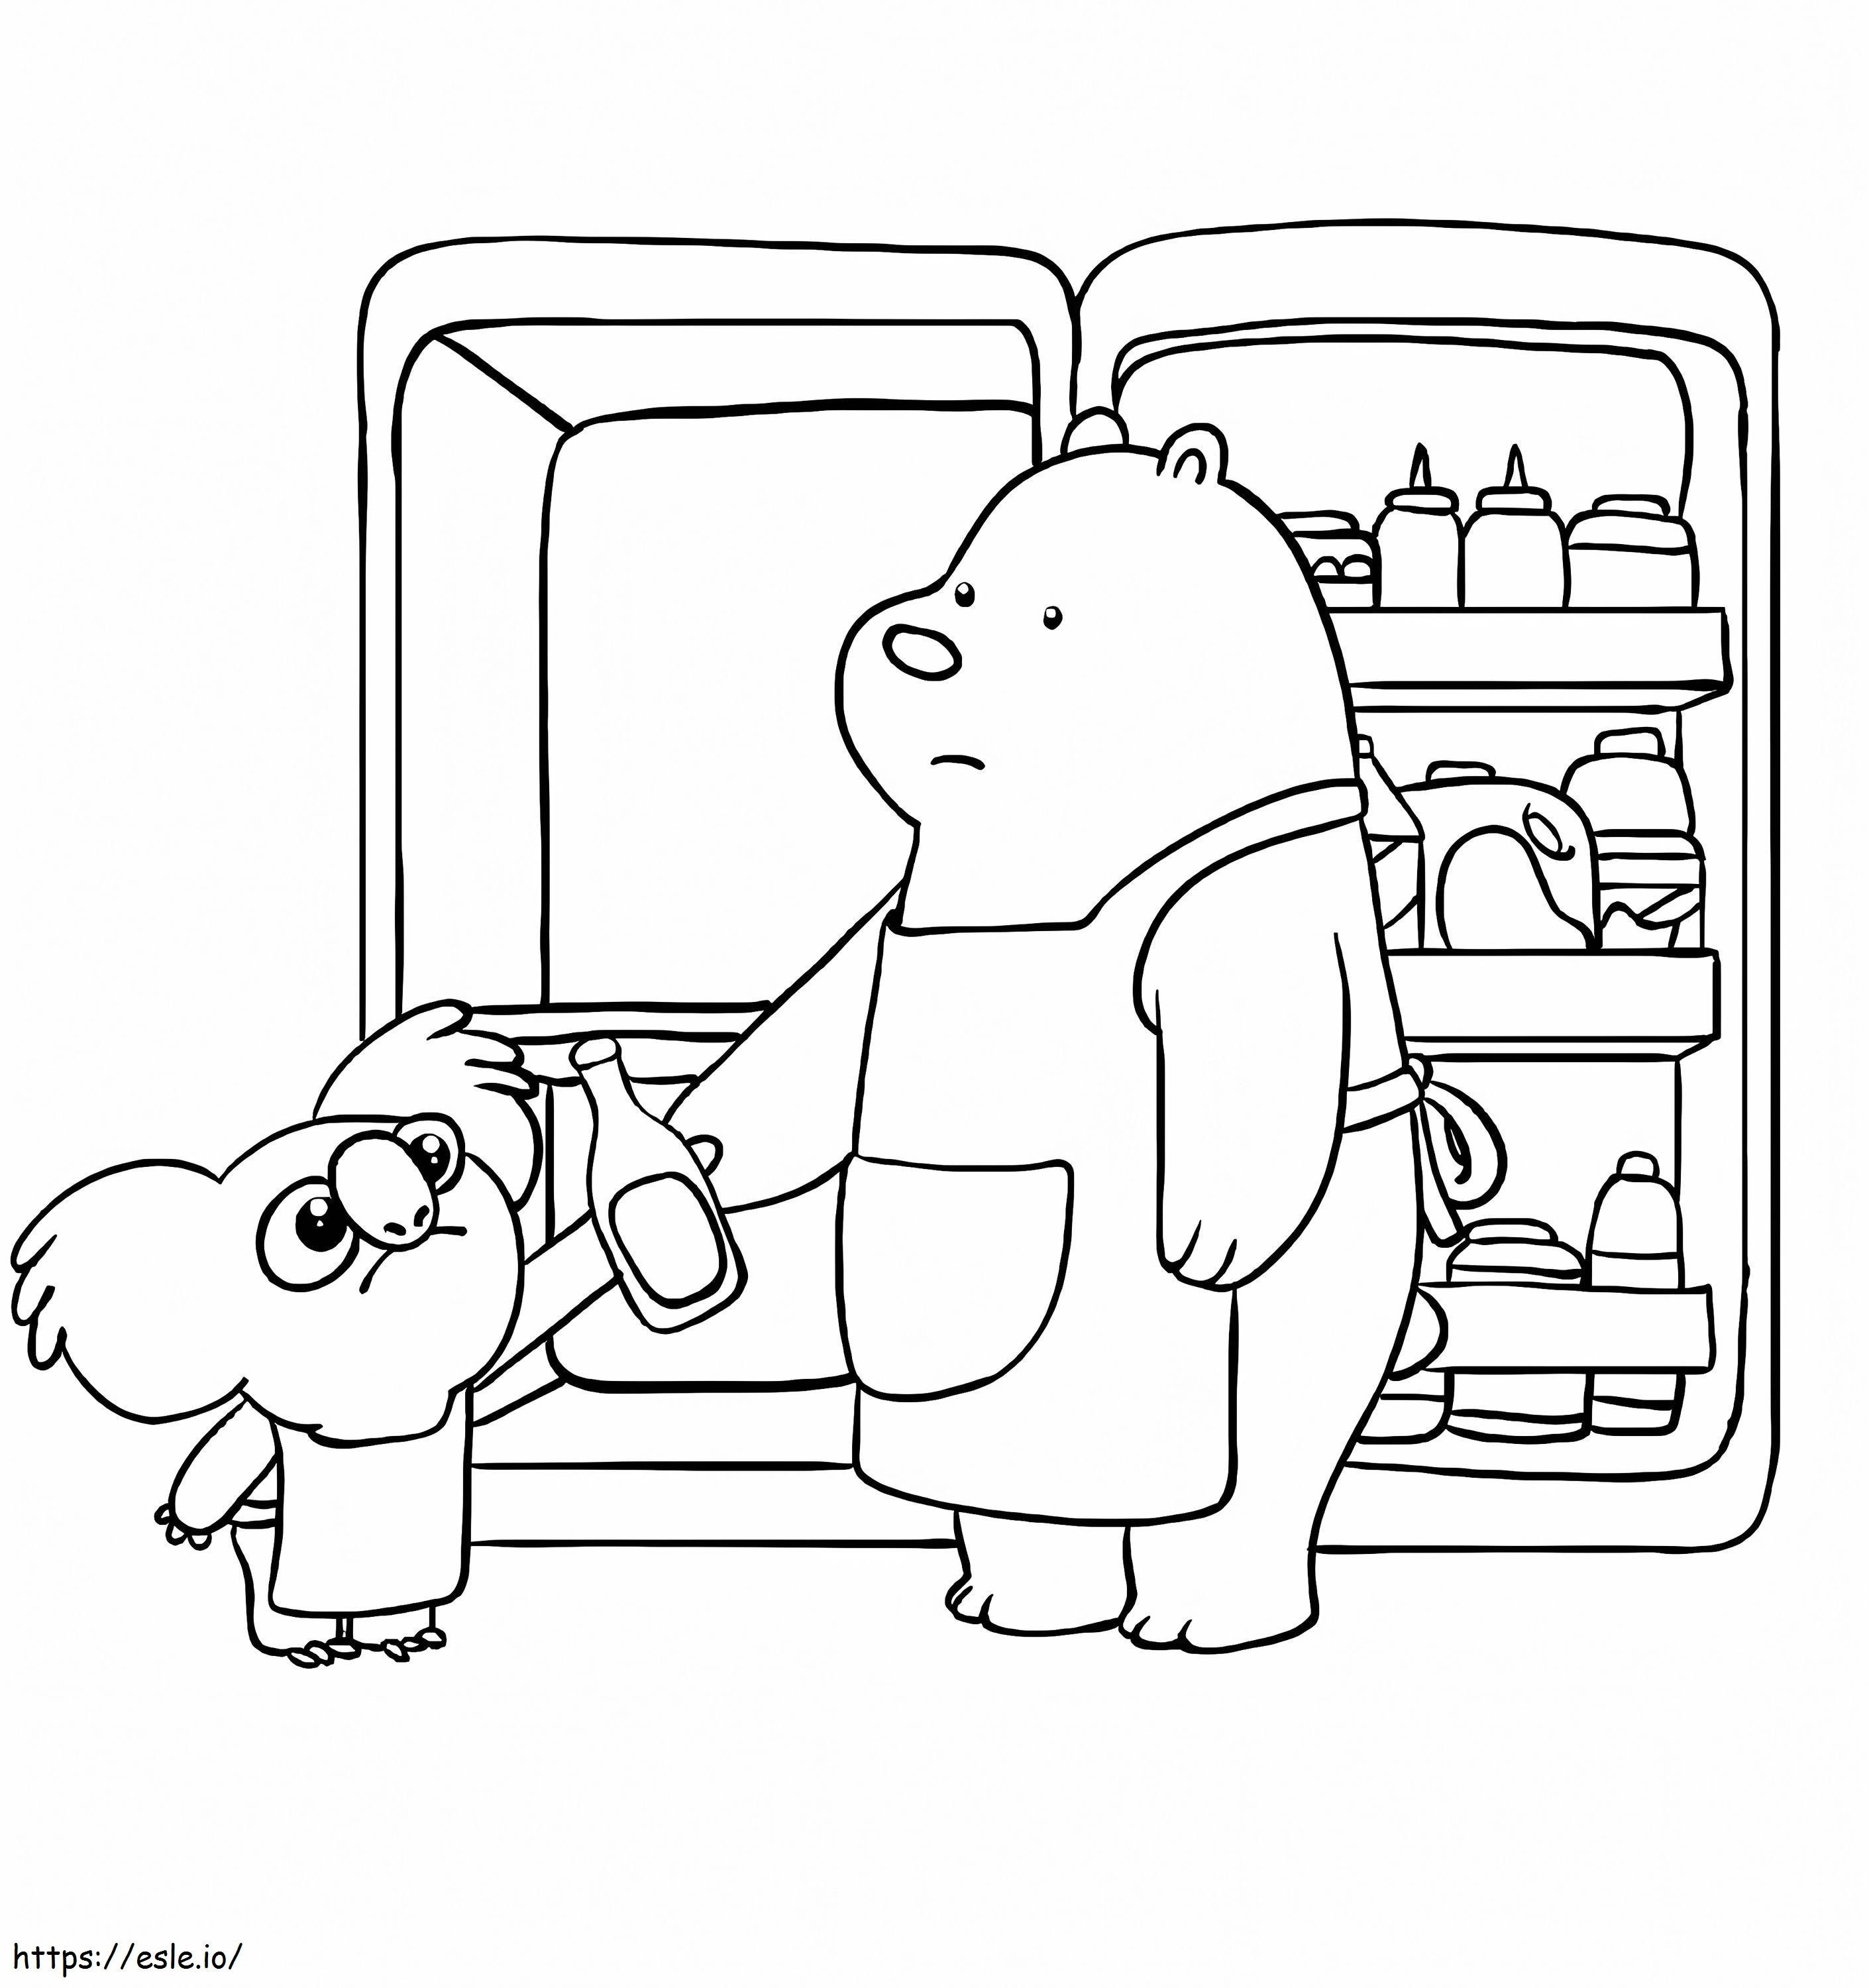 1560476982 Ice Bear And Nom Nom A4 coloring page